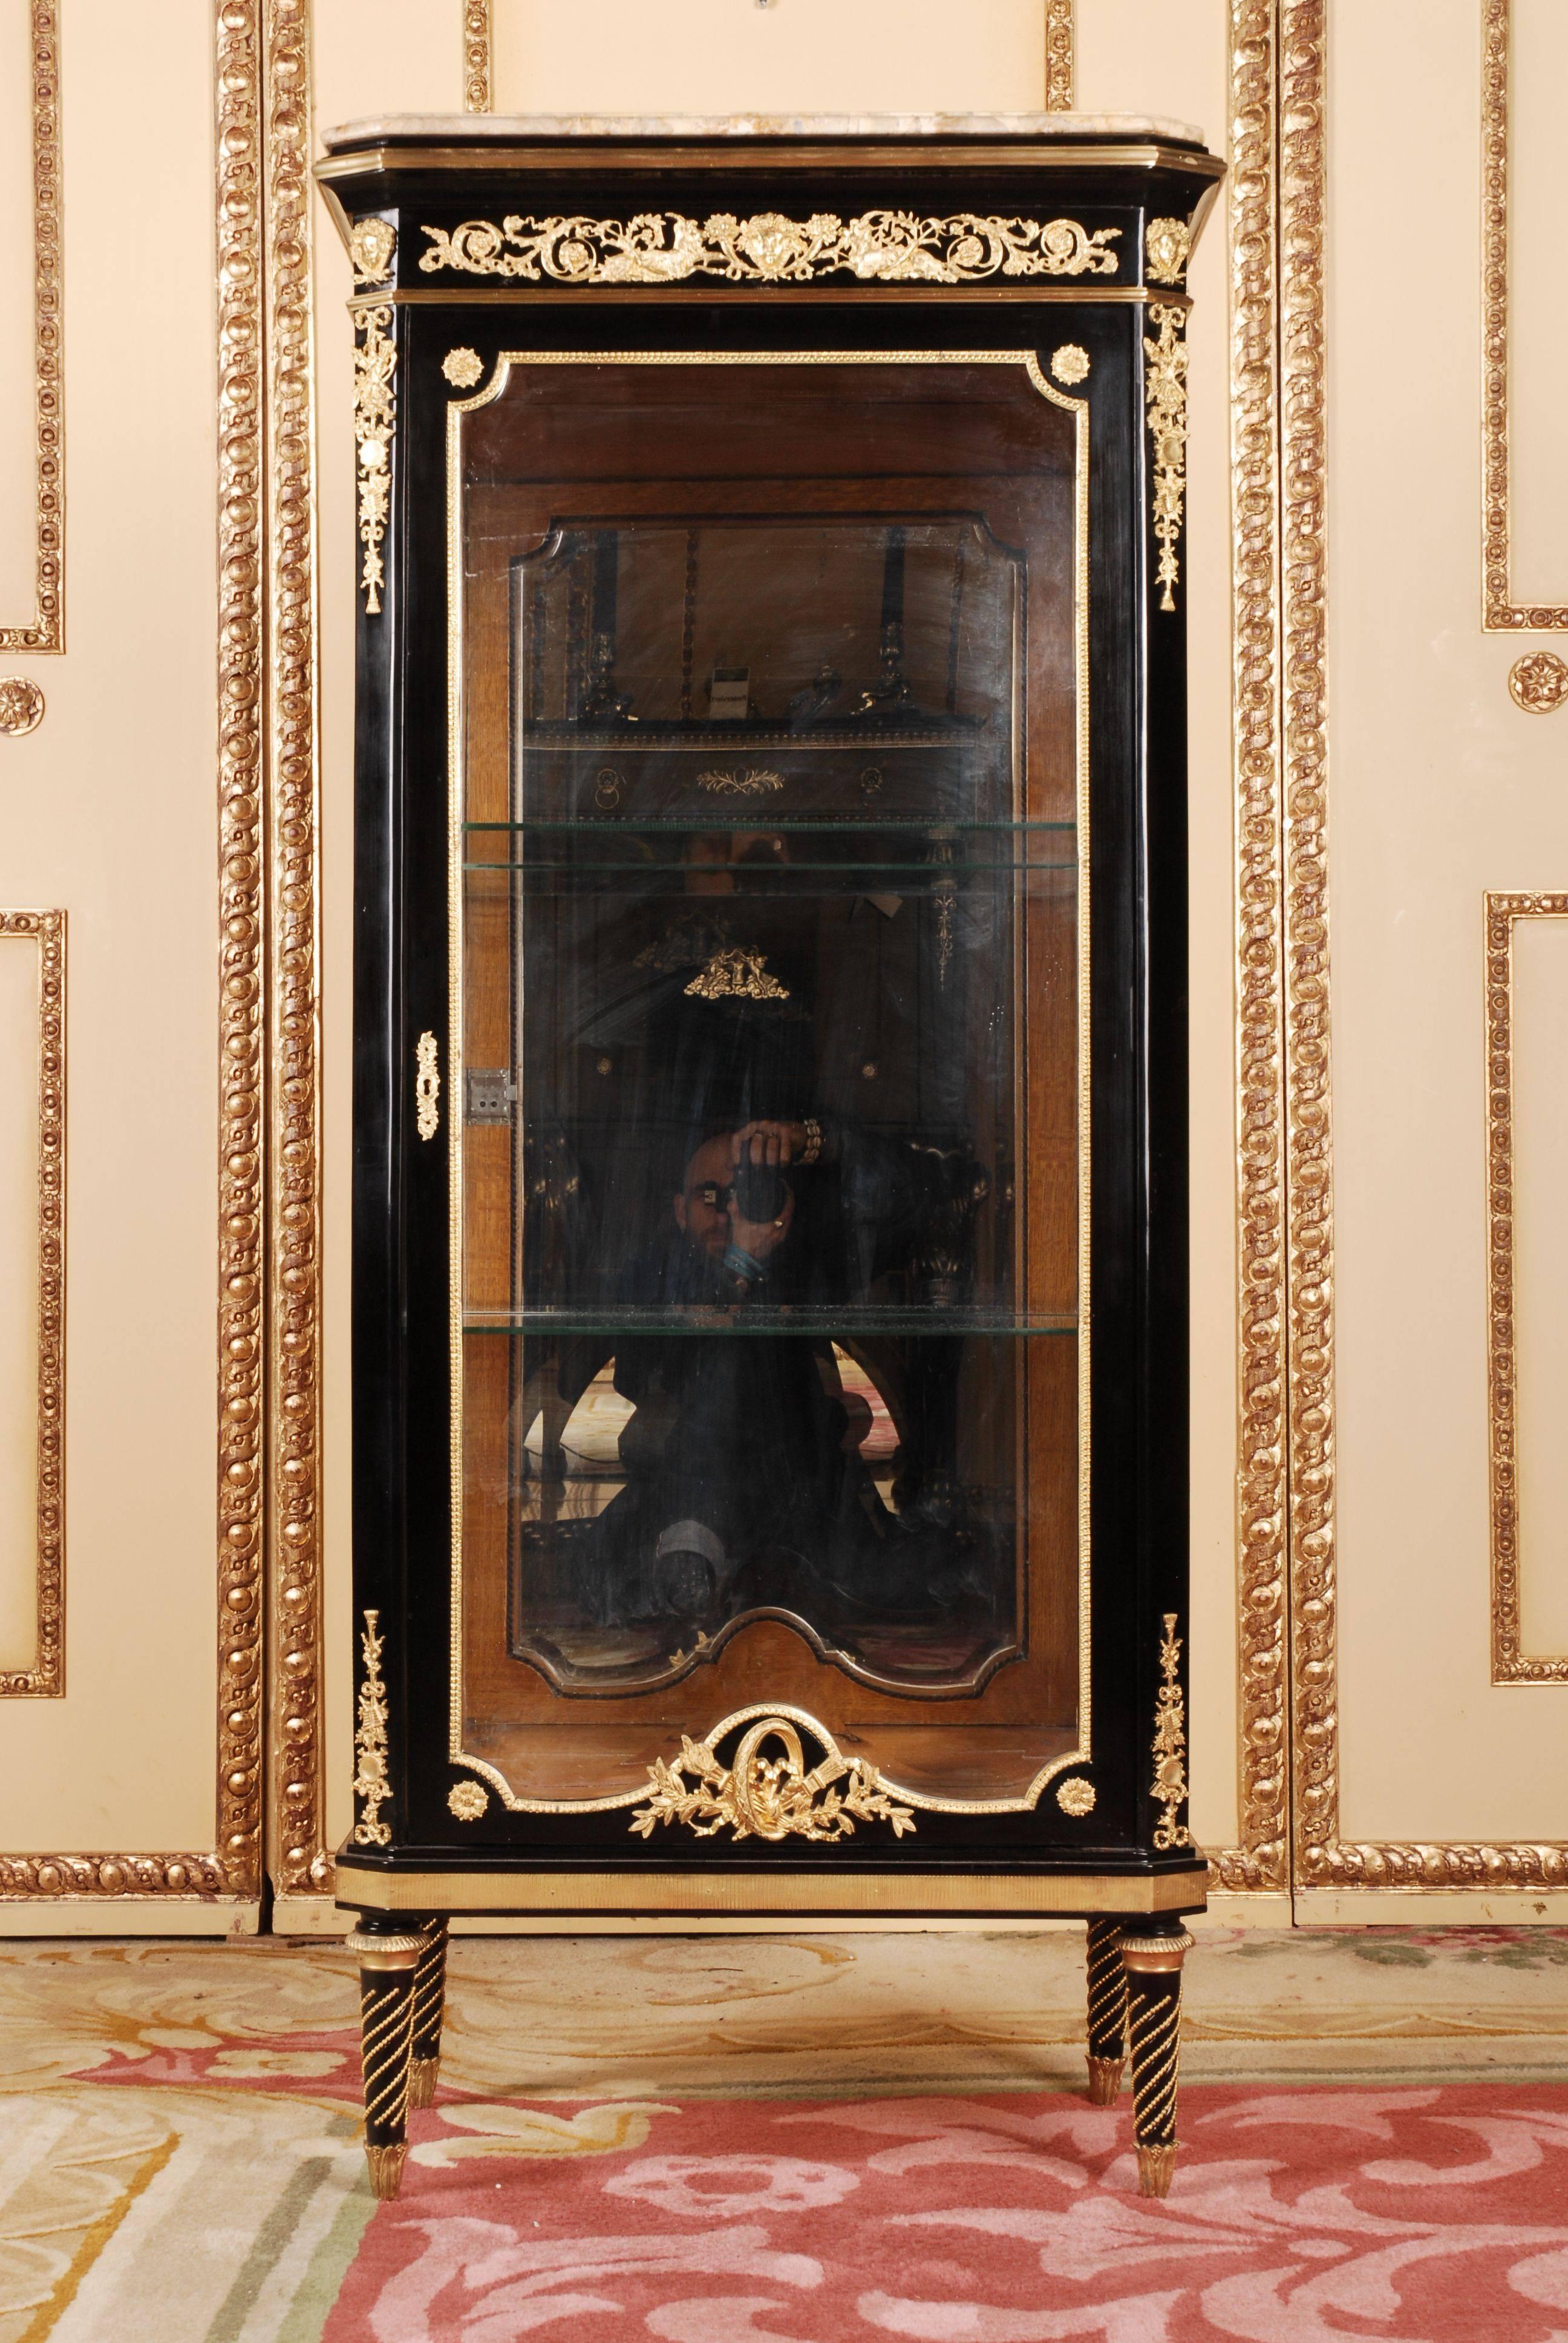 Exclusive French Vitrine in Louis XVI style.
Finely engraved and moulded bronze. Solid beechwood. Three sided glassed, one drawered body on conical legs. Profile- framed flecked Marble platter. On the front, corners and sides, classicist